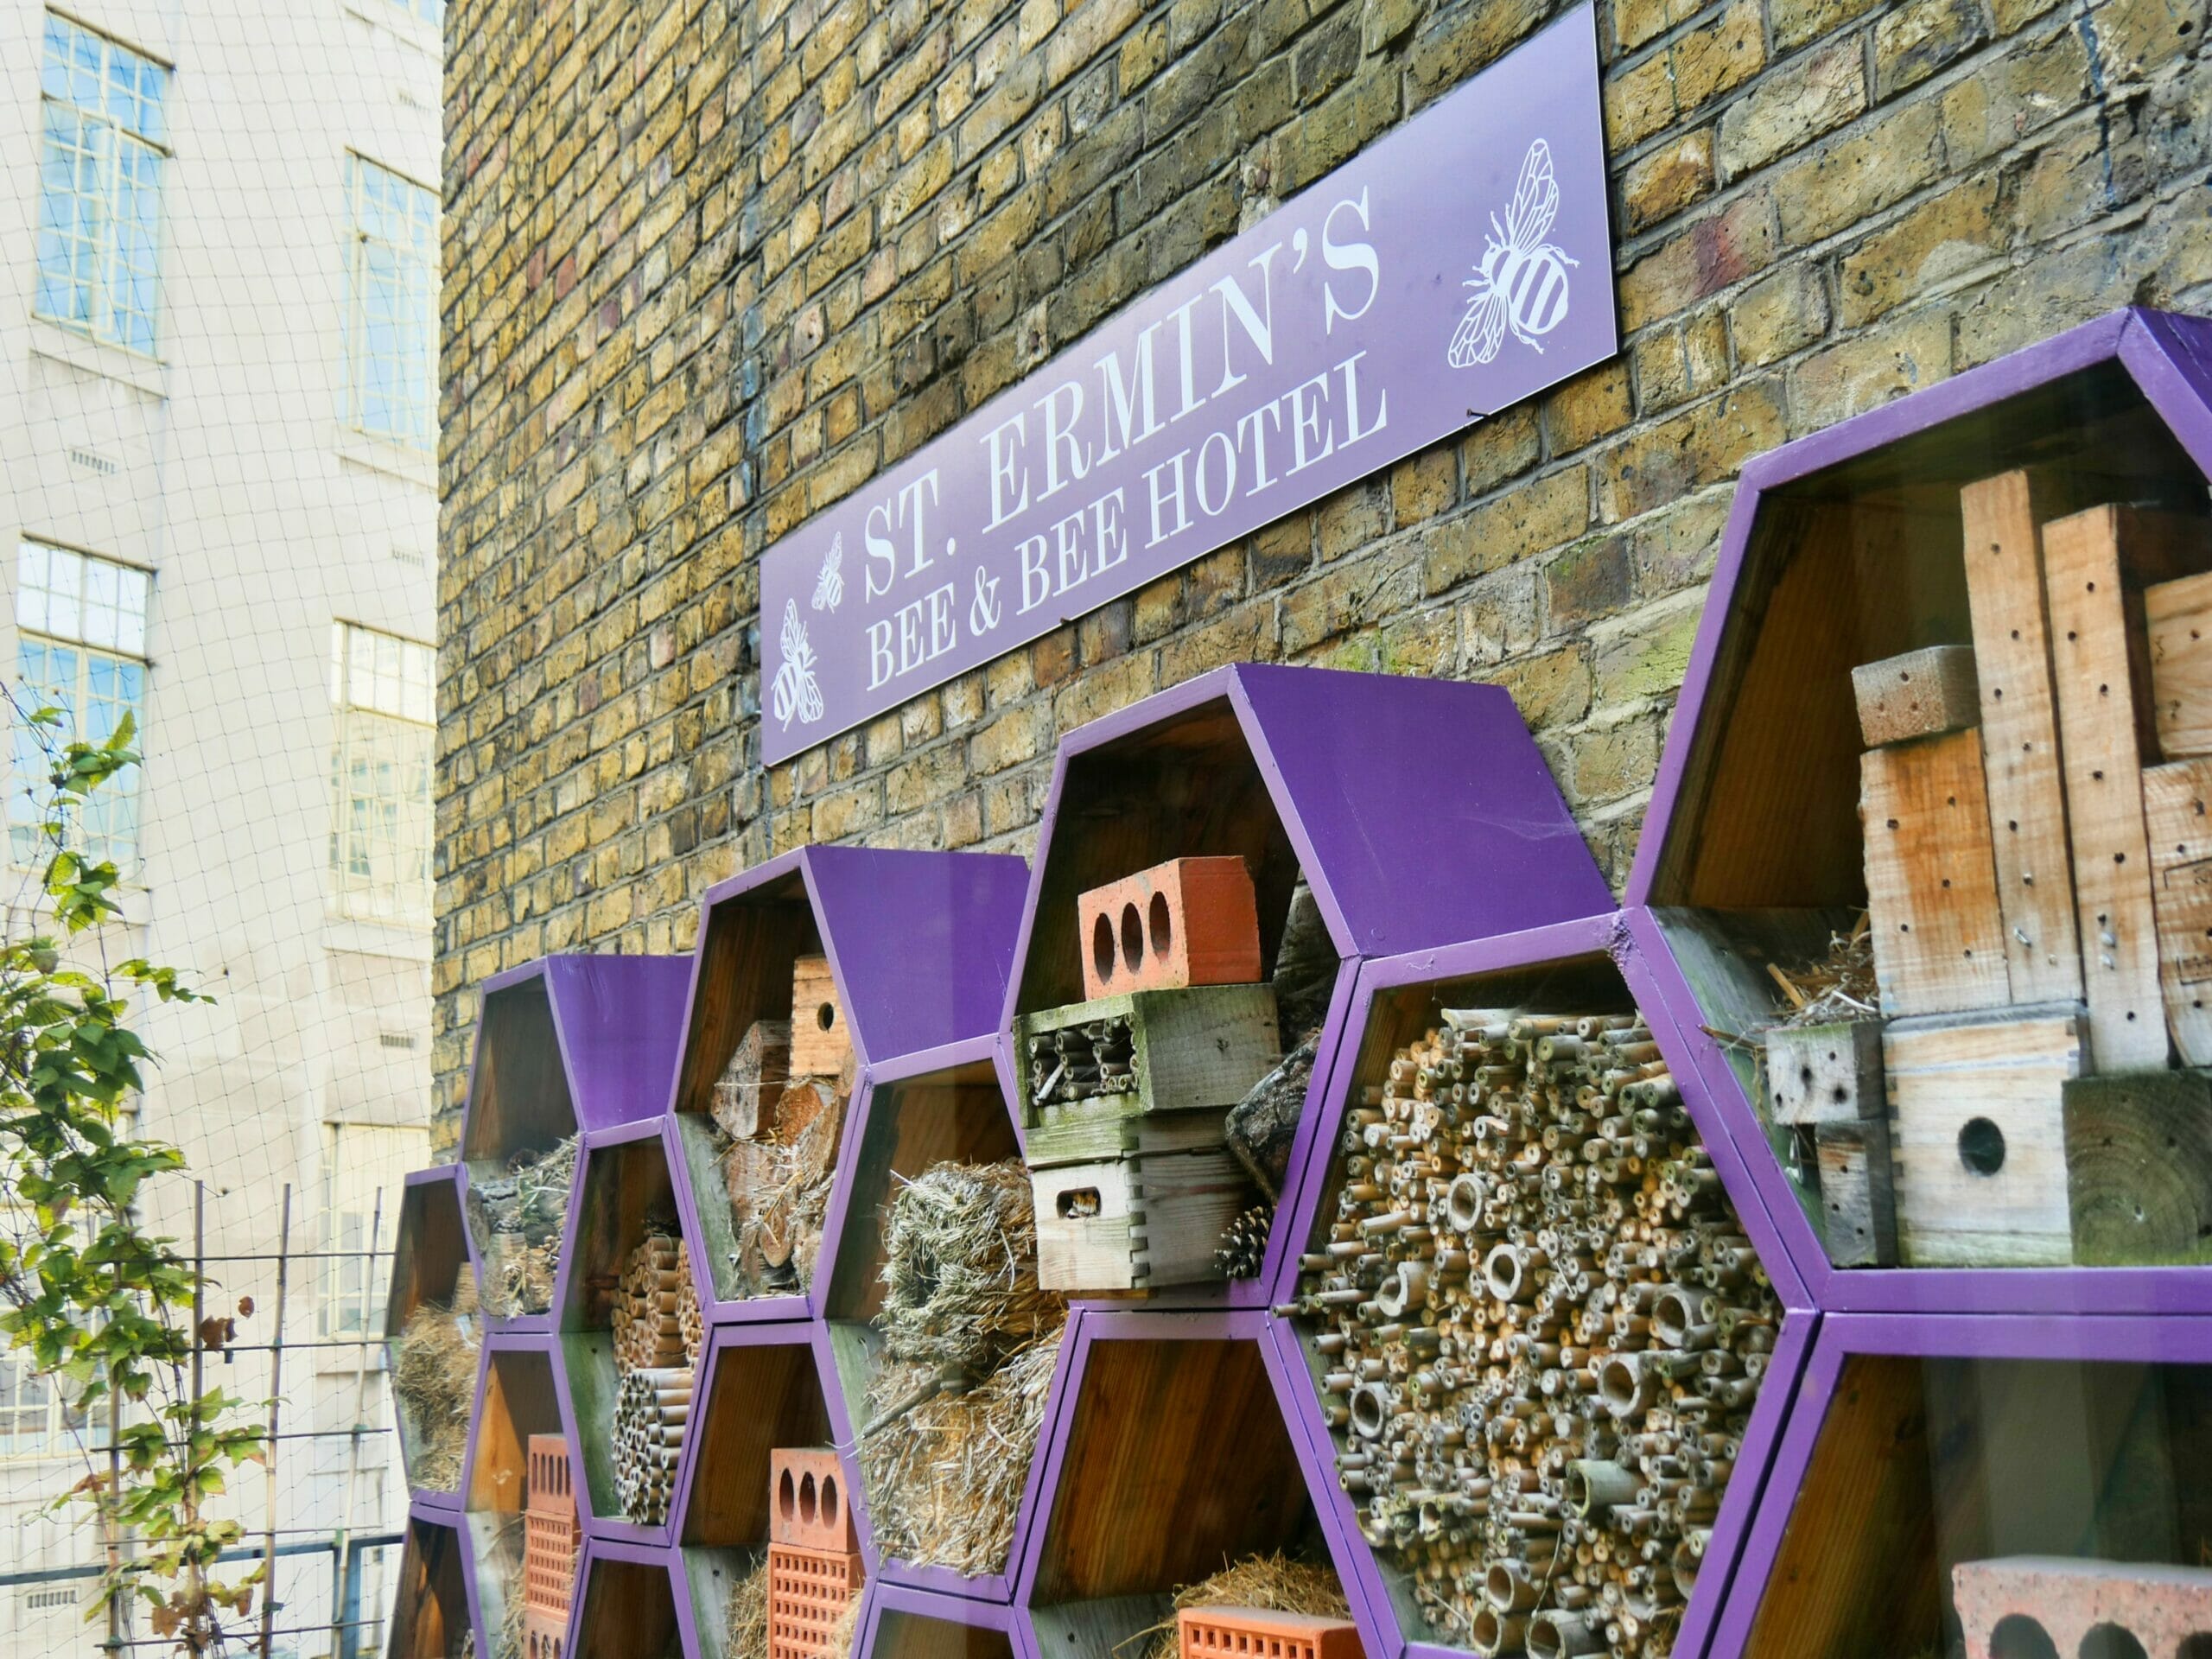 The "Bee and Bee Hotel" at St. Ermin's Hotel - a set of bee houses on one of the top floors